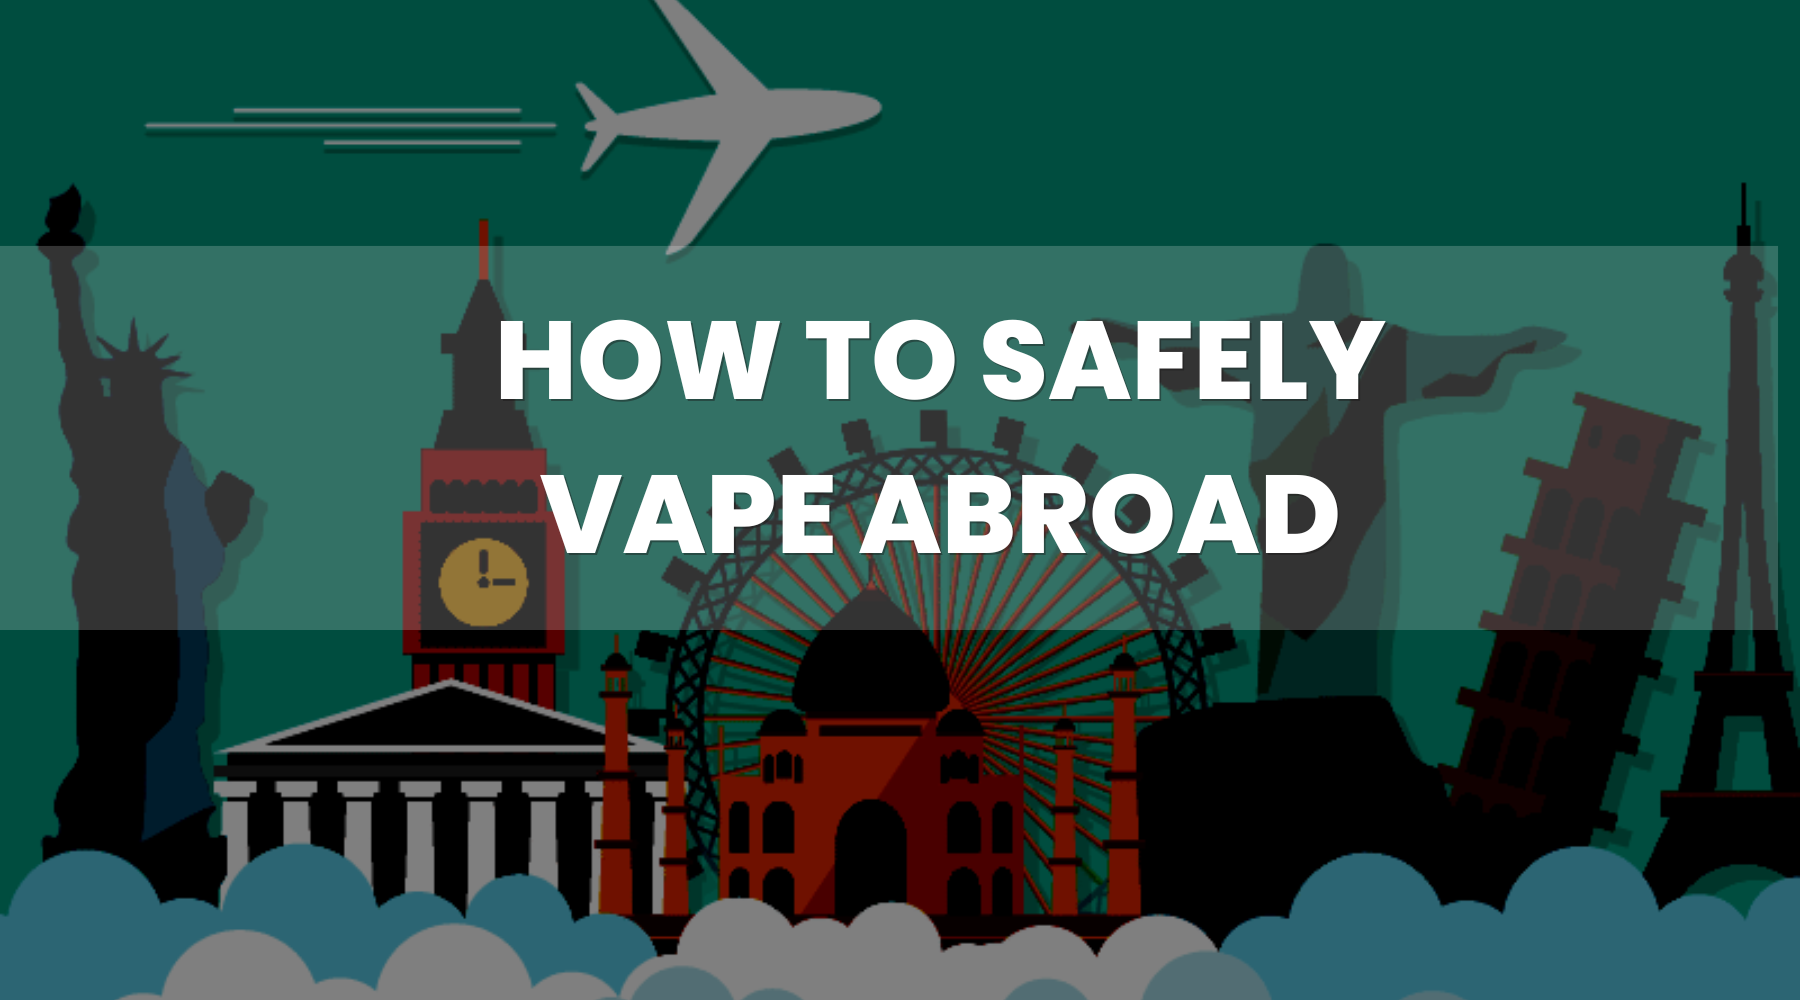 How to Safely Vape Abroad